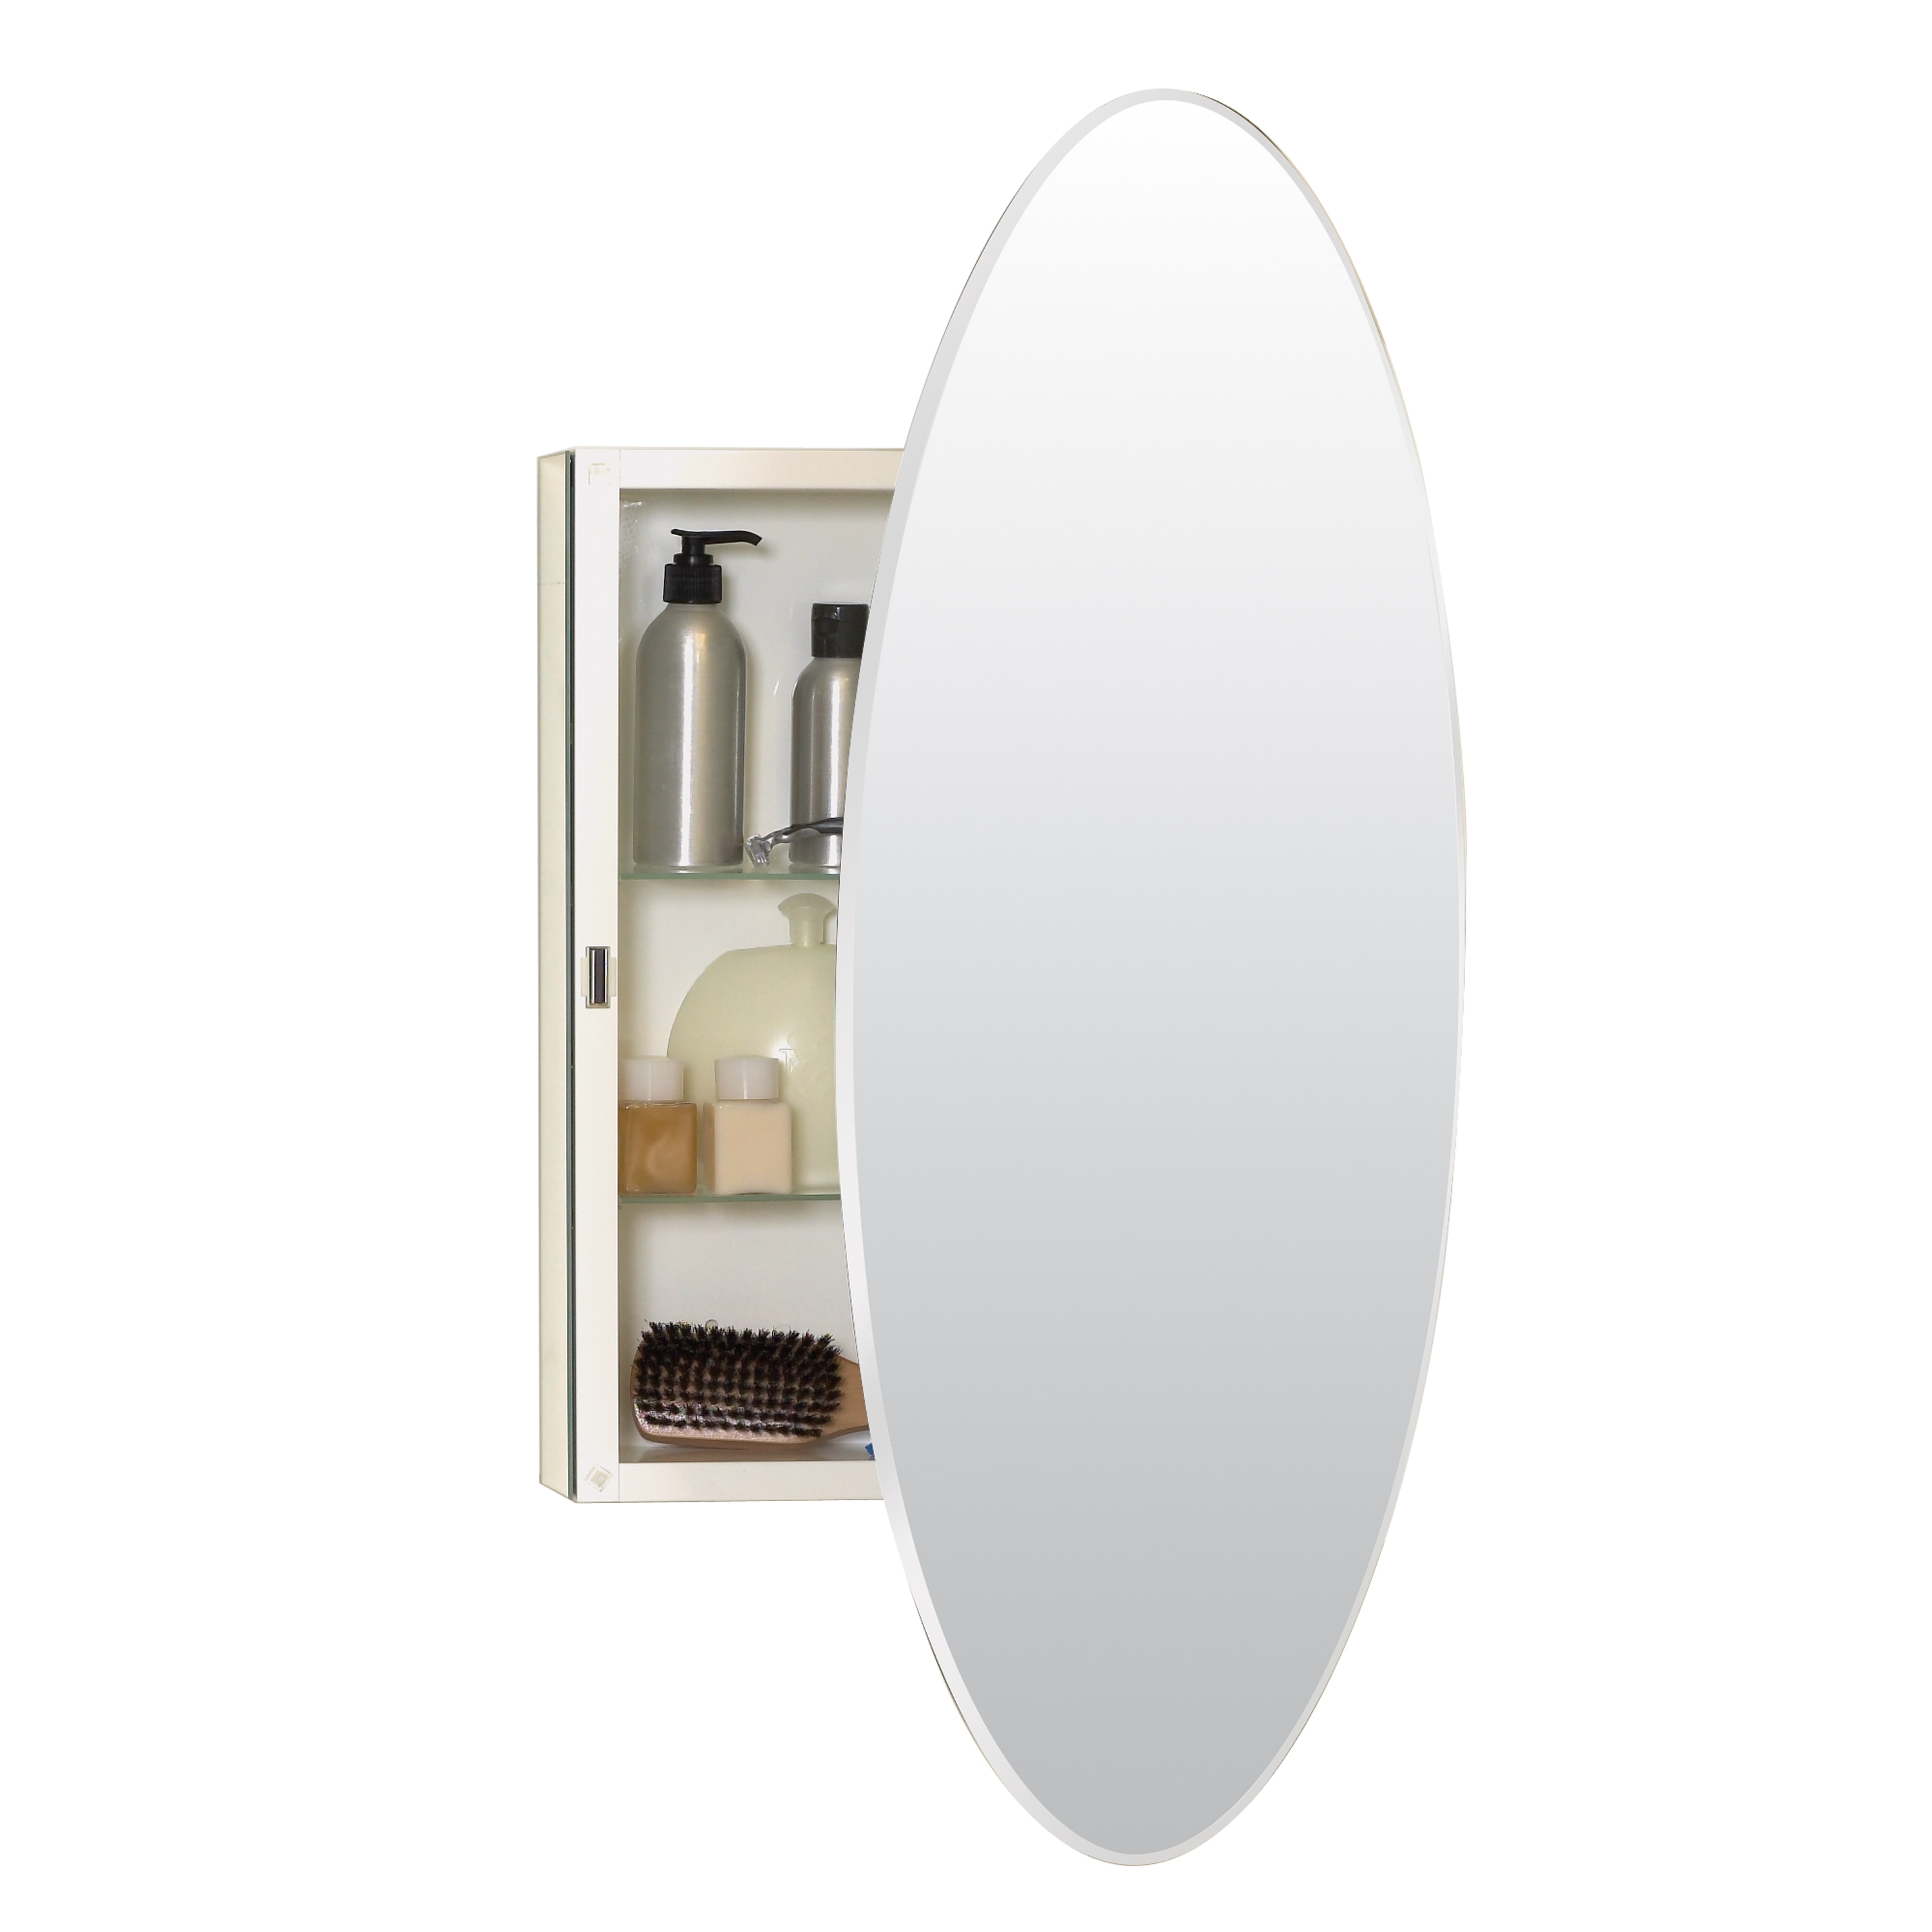 Renovators Supply 24 Stainless Steel Medicine Cabinet Mirrored Wall Mount